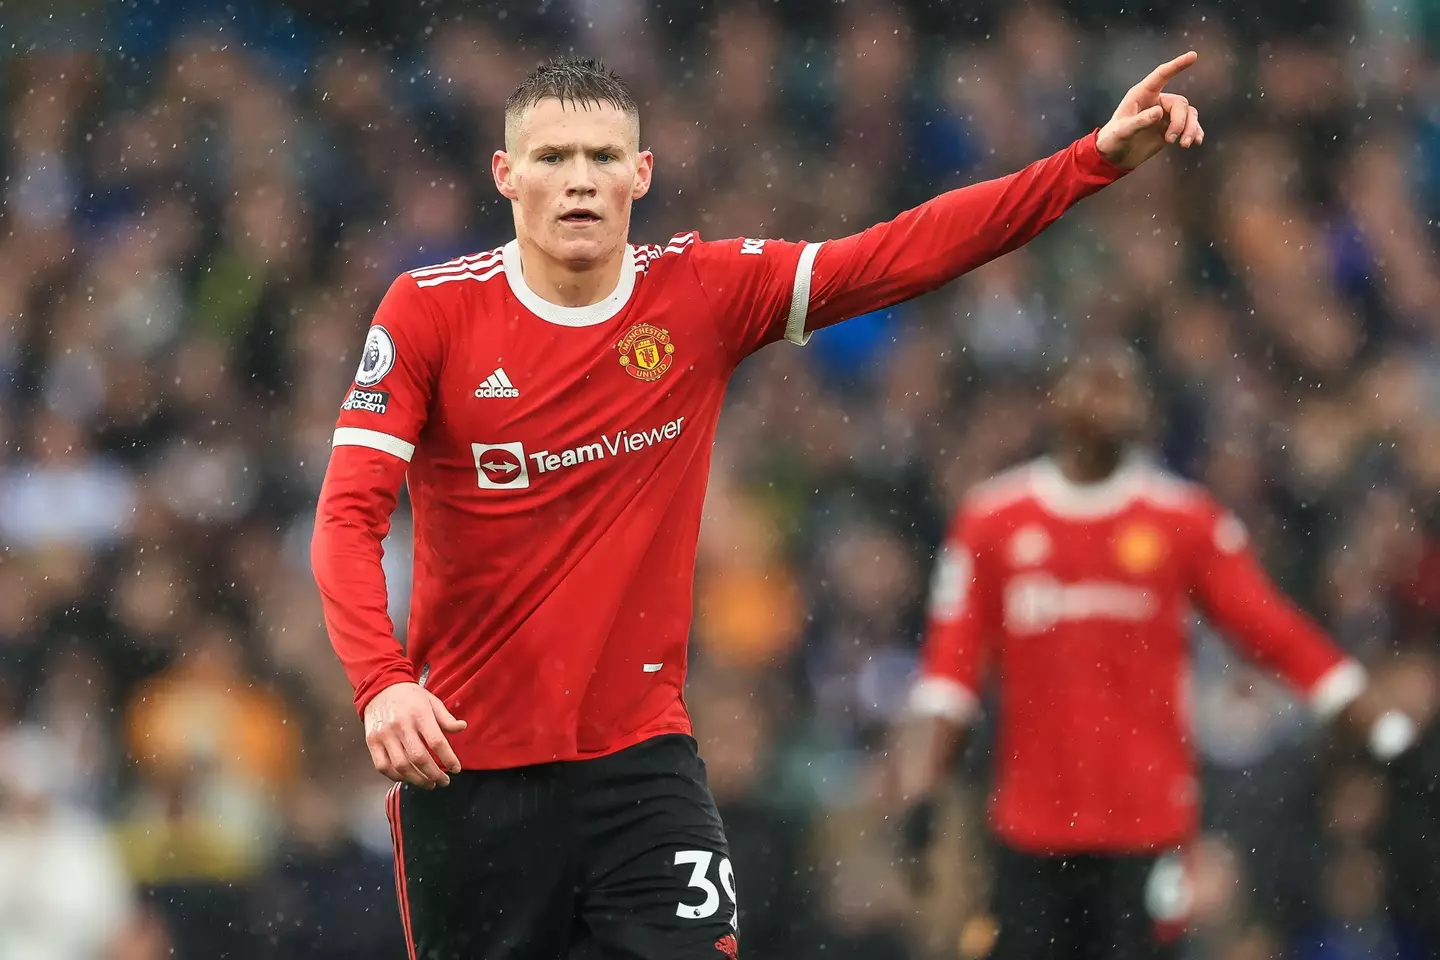 McTominay helped United to a crucial win at Elland Road (Image: PA)